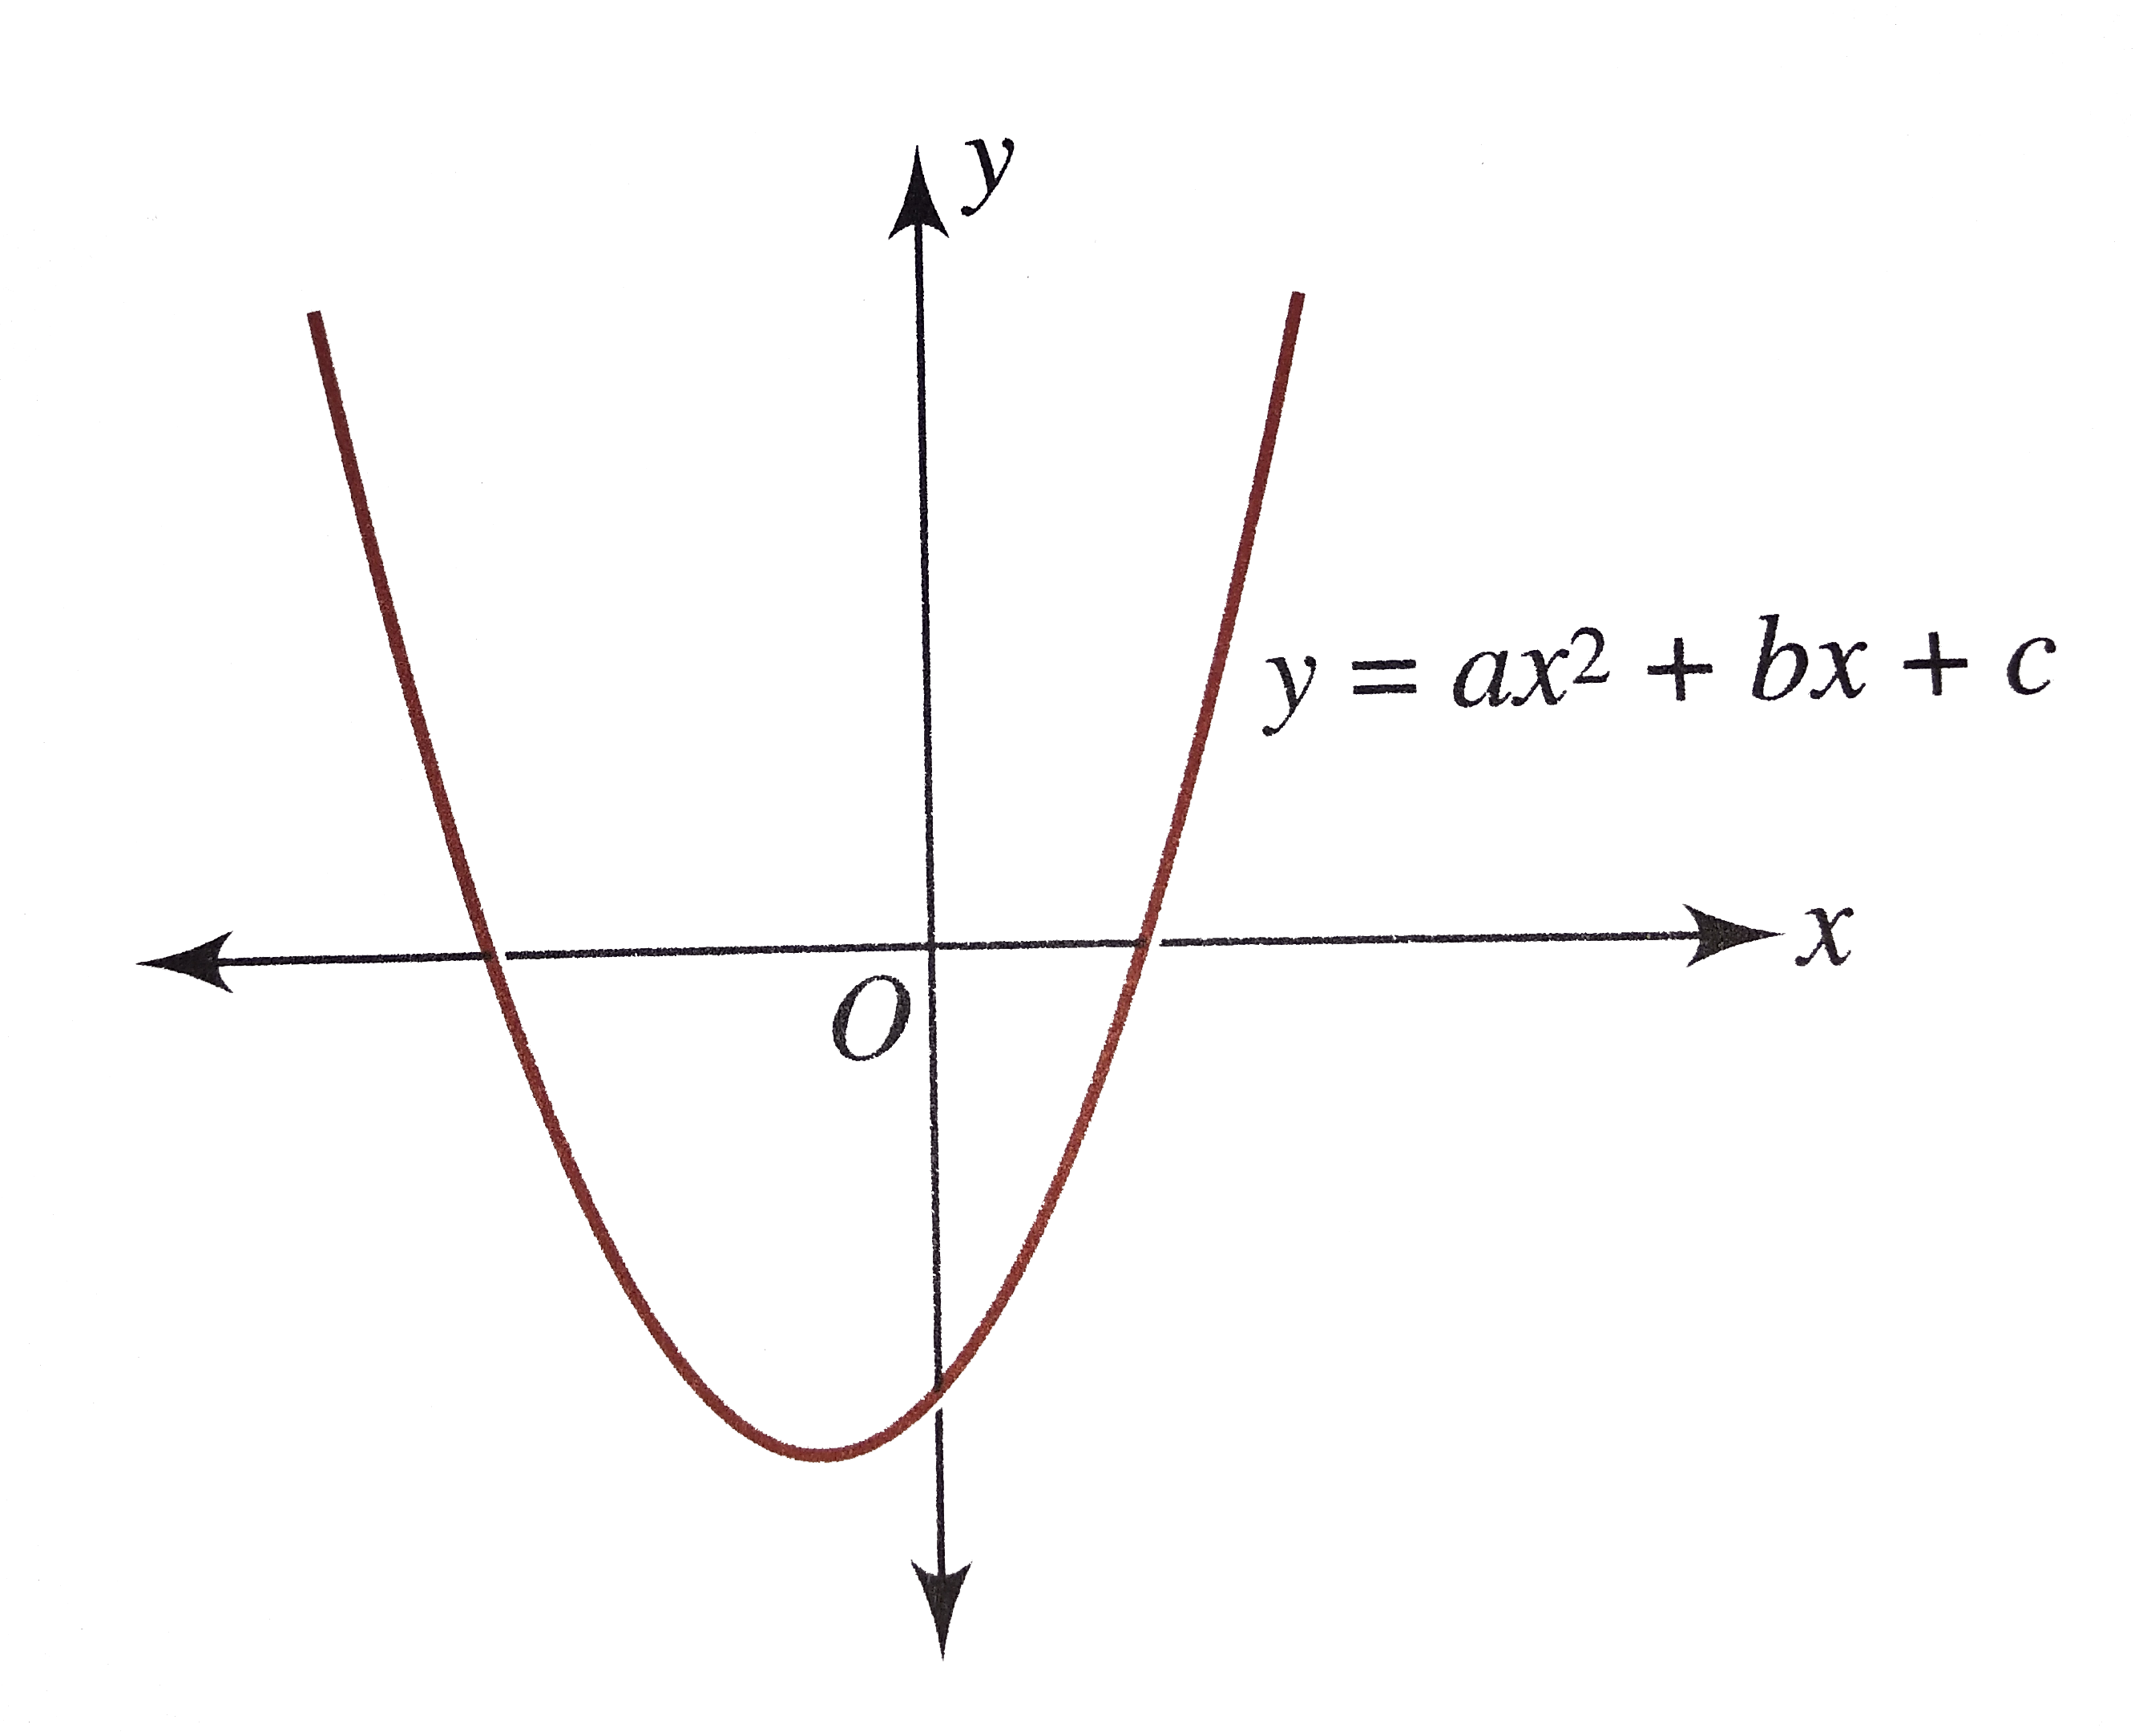 For Following Graphs Of Y Ax 2 Bx C With A B C C R Comment On The Sign Of